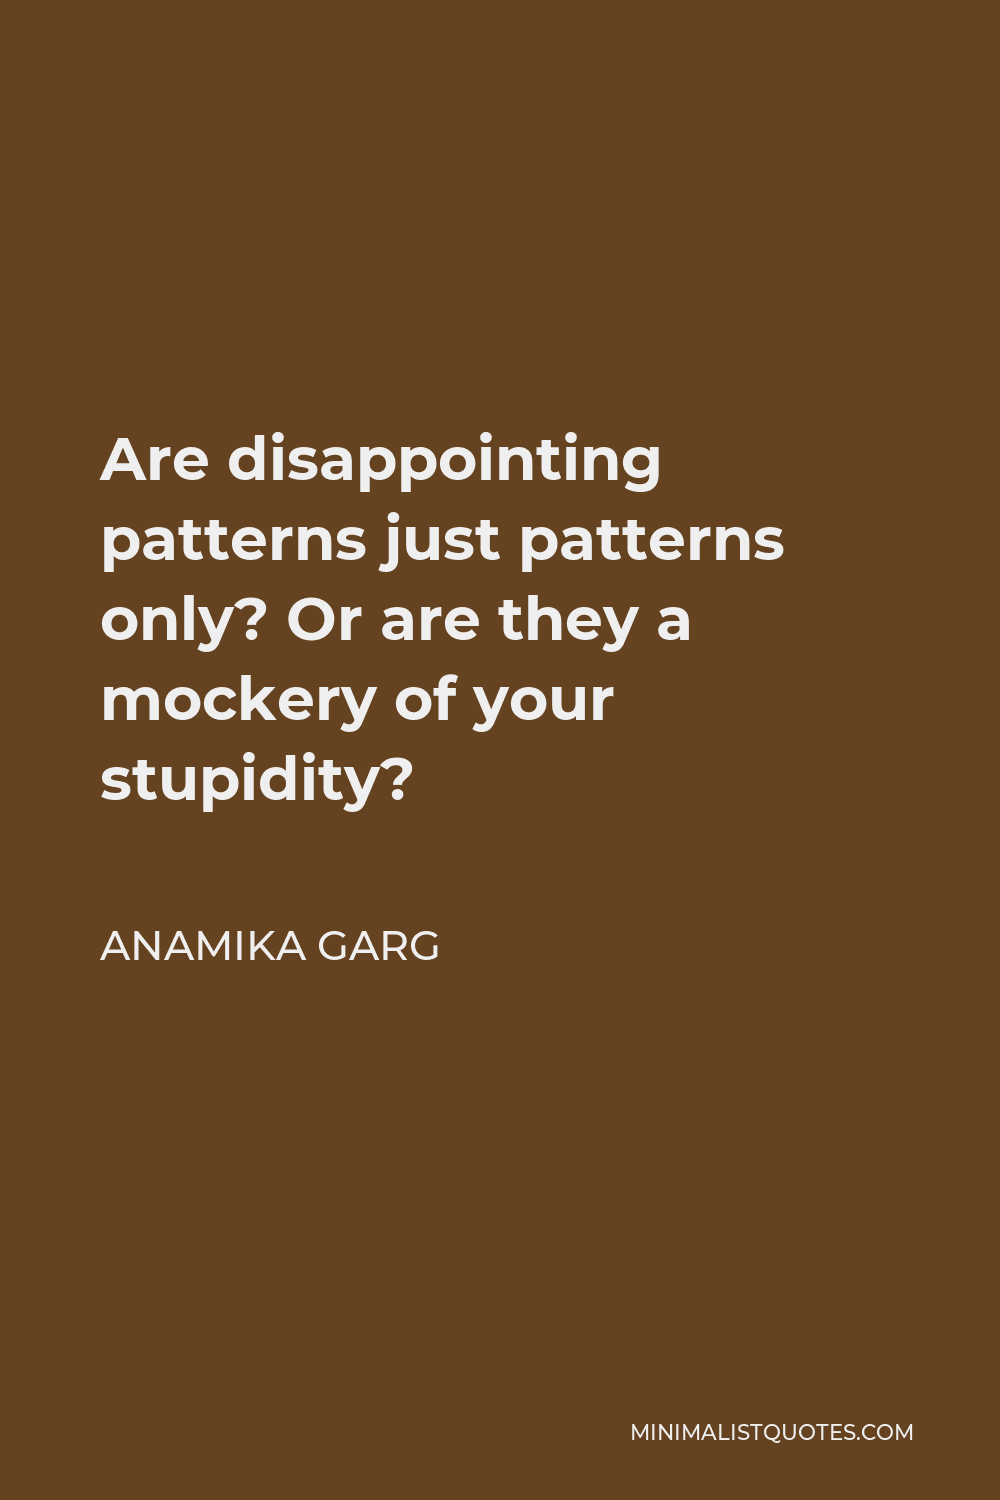 Anamika Garg Quote - Are disappointing patterns just patterns only? Or are they a mockery of your stupidity?